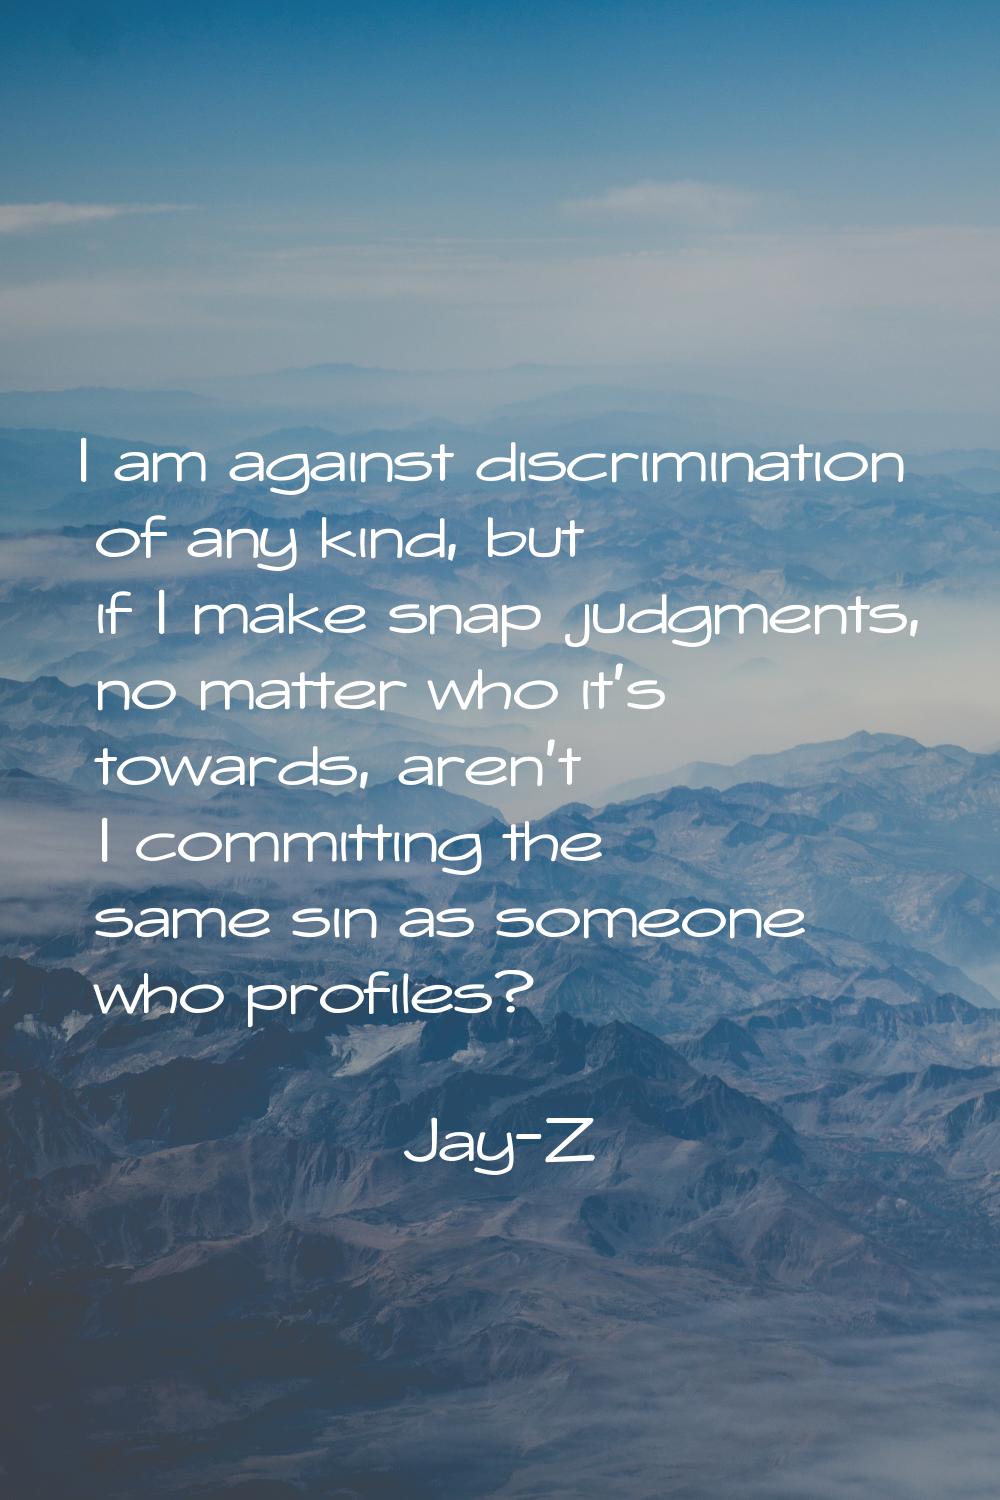 I am against discrimination of any kind, but if I make snap judgments, no matter who it's towards, 